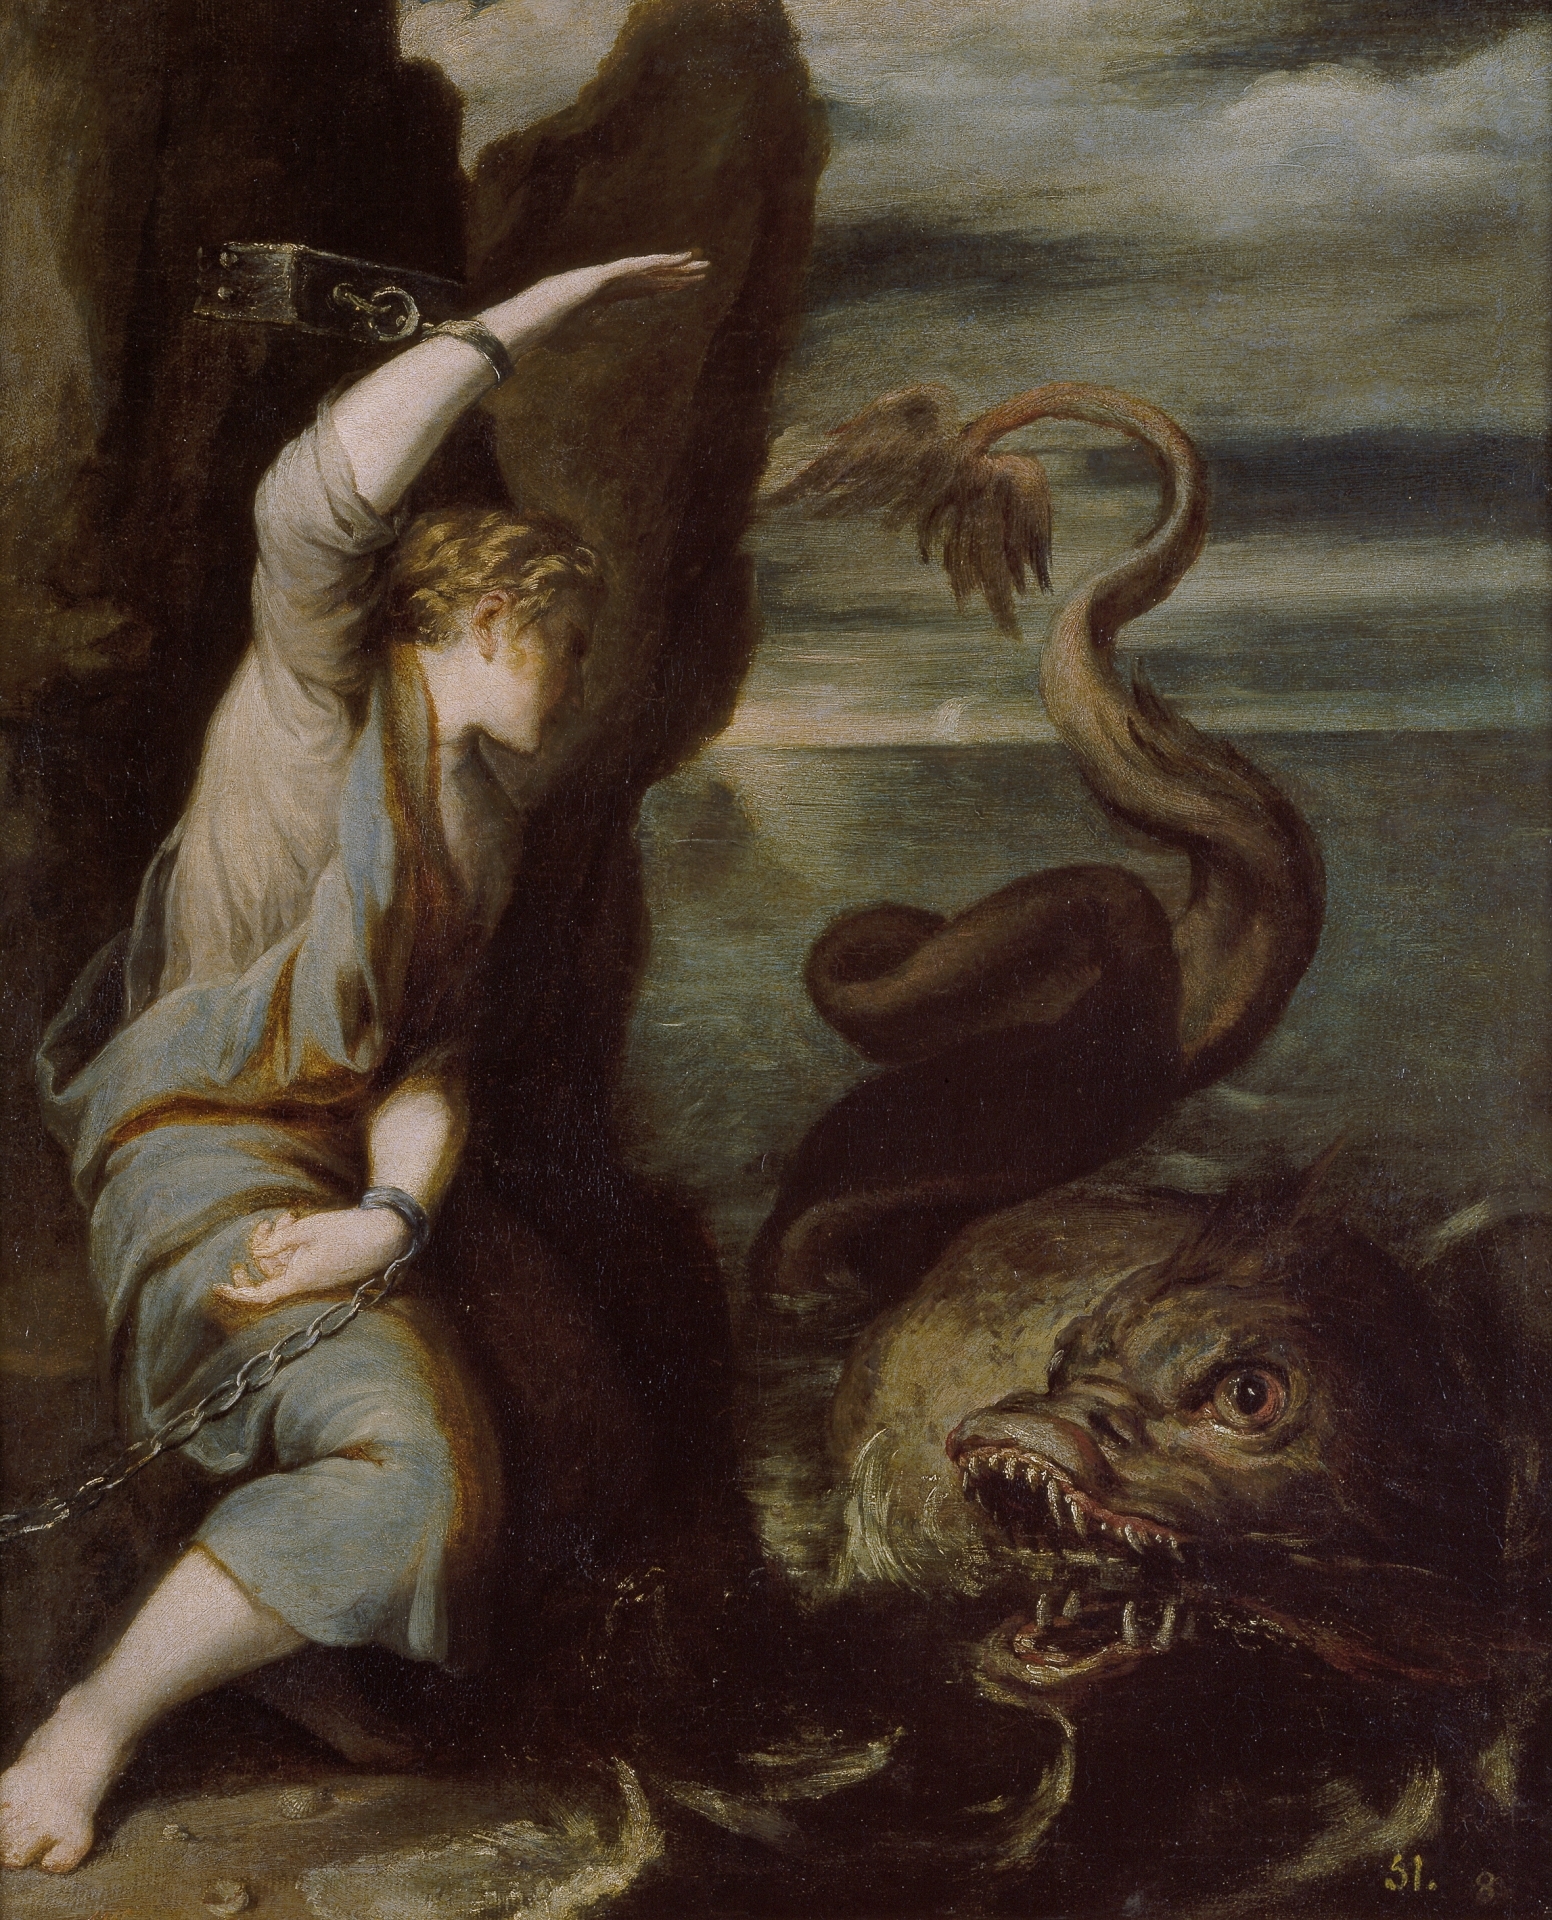 The Wrath of the Serpent (Scottish Folklore)